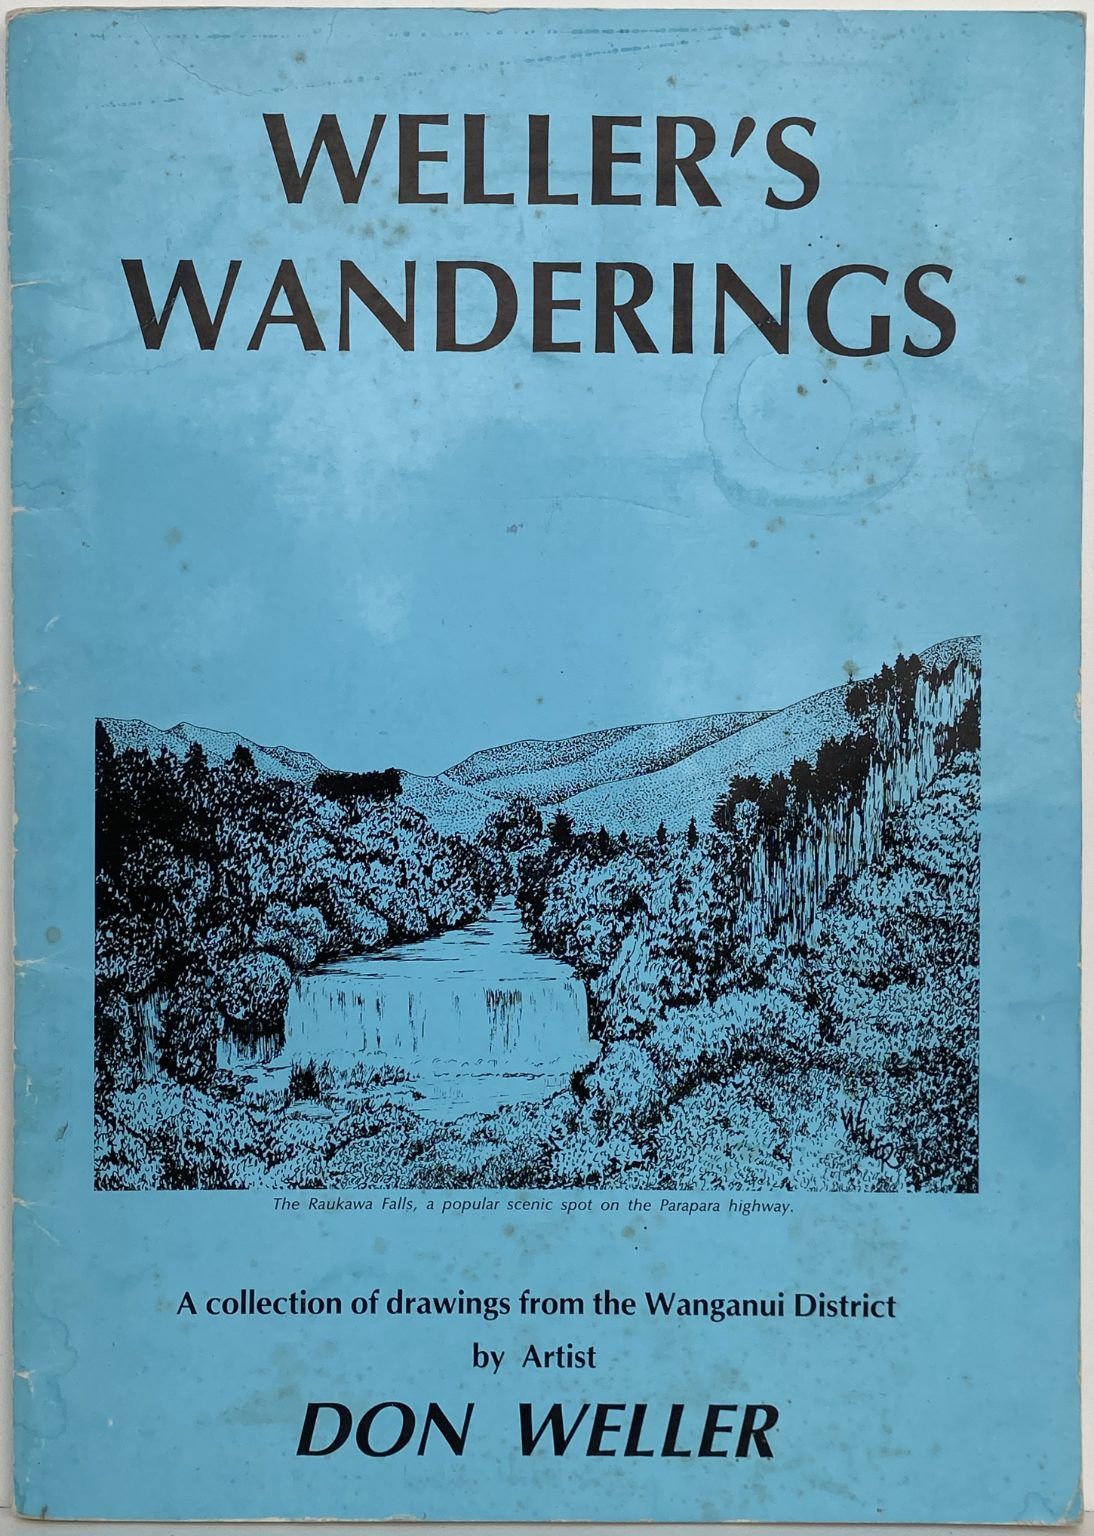 WELLER'S WANDERINGS: A collection of drawings from the Wanganui District